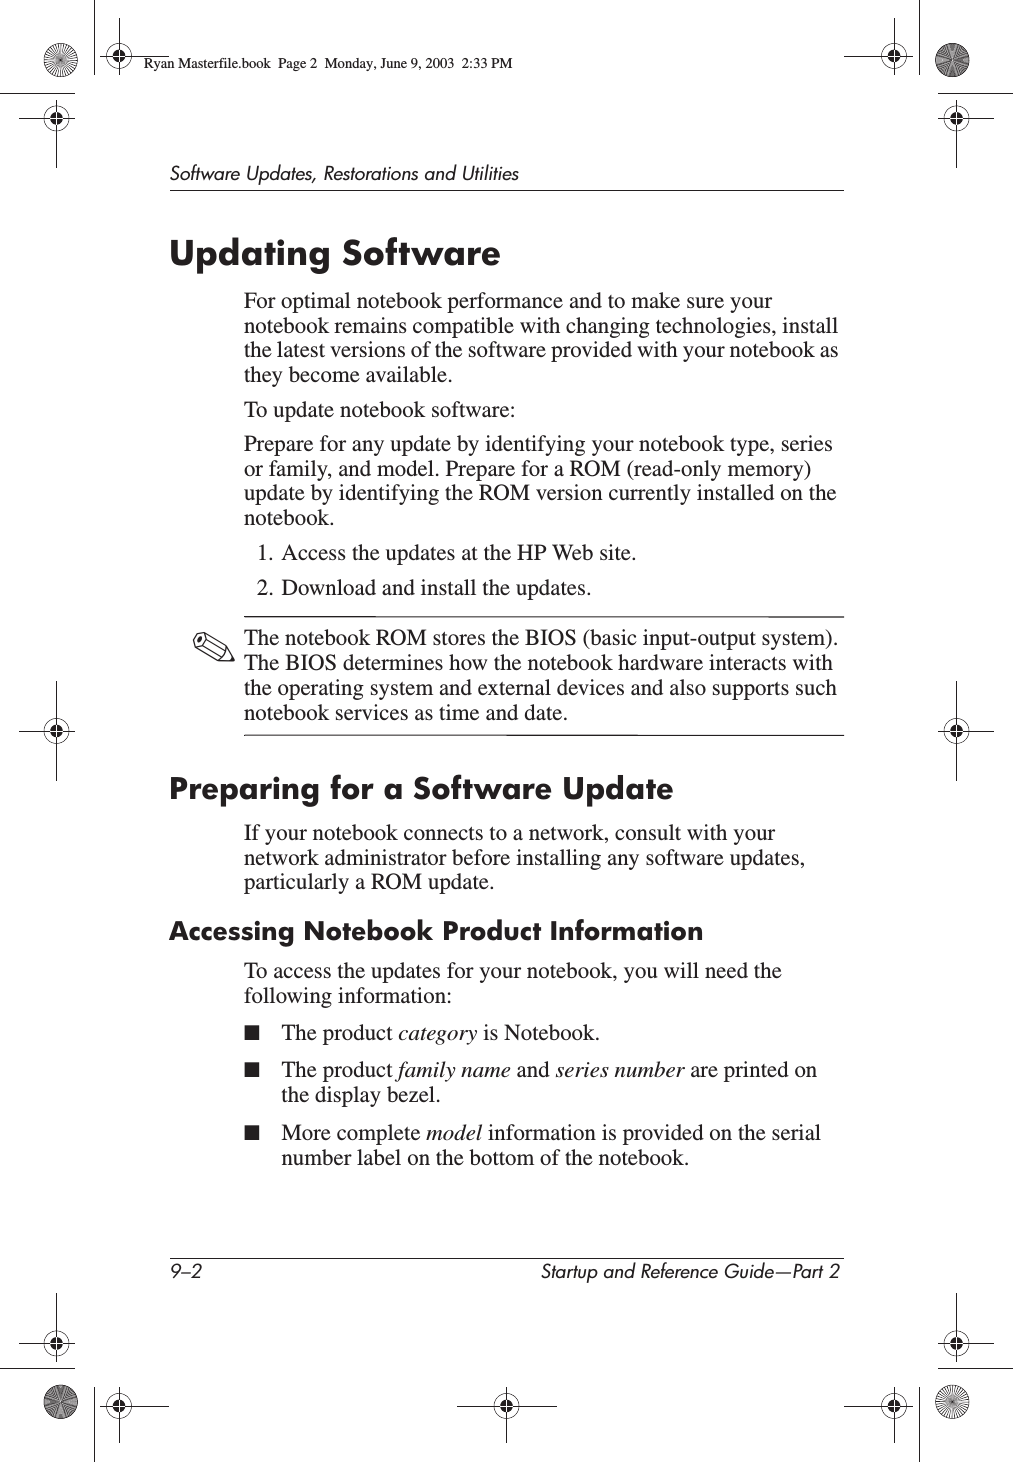 9–2 Startup and Reference Guide—Part 2Software Updates, Restorations and UtilitiesUpdating SoftwareFor optimal notebook performance and to make sure your notebook remains compatible with changing technologies, install the latest versions of the software provided with your notebook as they become available.To update notebook software:Prepare for any update by identifying your notebook type, series or family, and model. Prepare for a ROM (read-only memory) update by identifying the ROM version currently installed on the notebook.1. Access the updates at the HP Web site.2. Download and install the updates.✎The notebook ROM stores the BIOS (basic input-output system). The BIOS determines how the notebook hardware interacts with the operating system and external devices and also supports such notebook services as time and date.Preparing for a Software UpdateIf your notebook connects to a network, consult with your network administrator before installing any software updates, particularly a ROM update.Accessing Notebook Product InformationTo access the updates for your notebook, you will need the following information:■The product category is Notebook.■The product family name and series number are printed on the display bezel.■More complete model information is provided on the serial number label on the bottom of the notebook.Ryan Masterfile.book  Page 2  Monday, June 9, 2003  2:33 PM